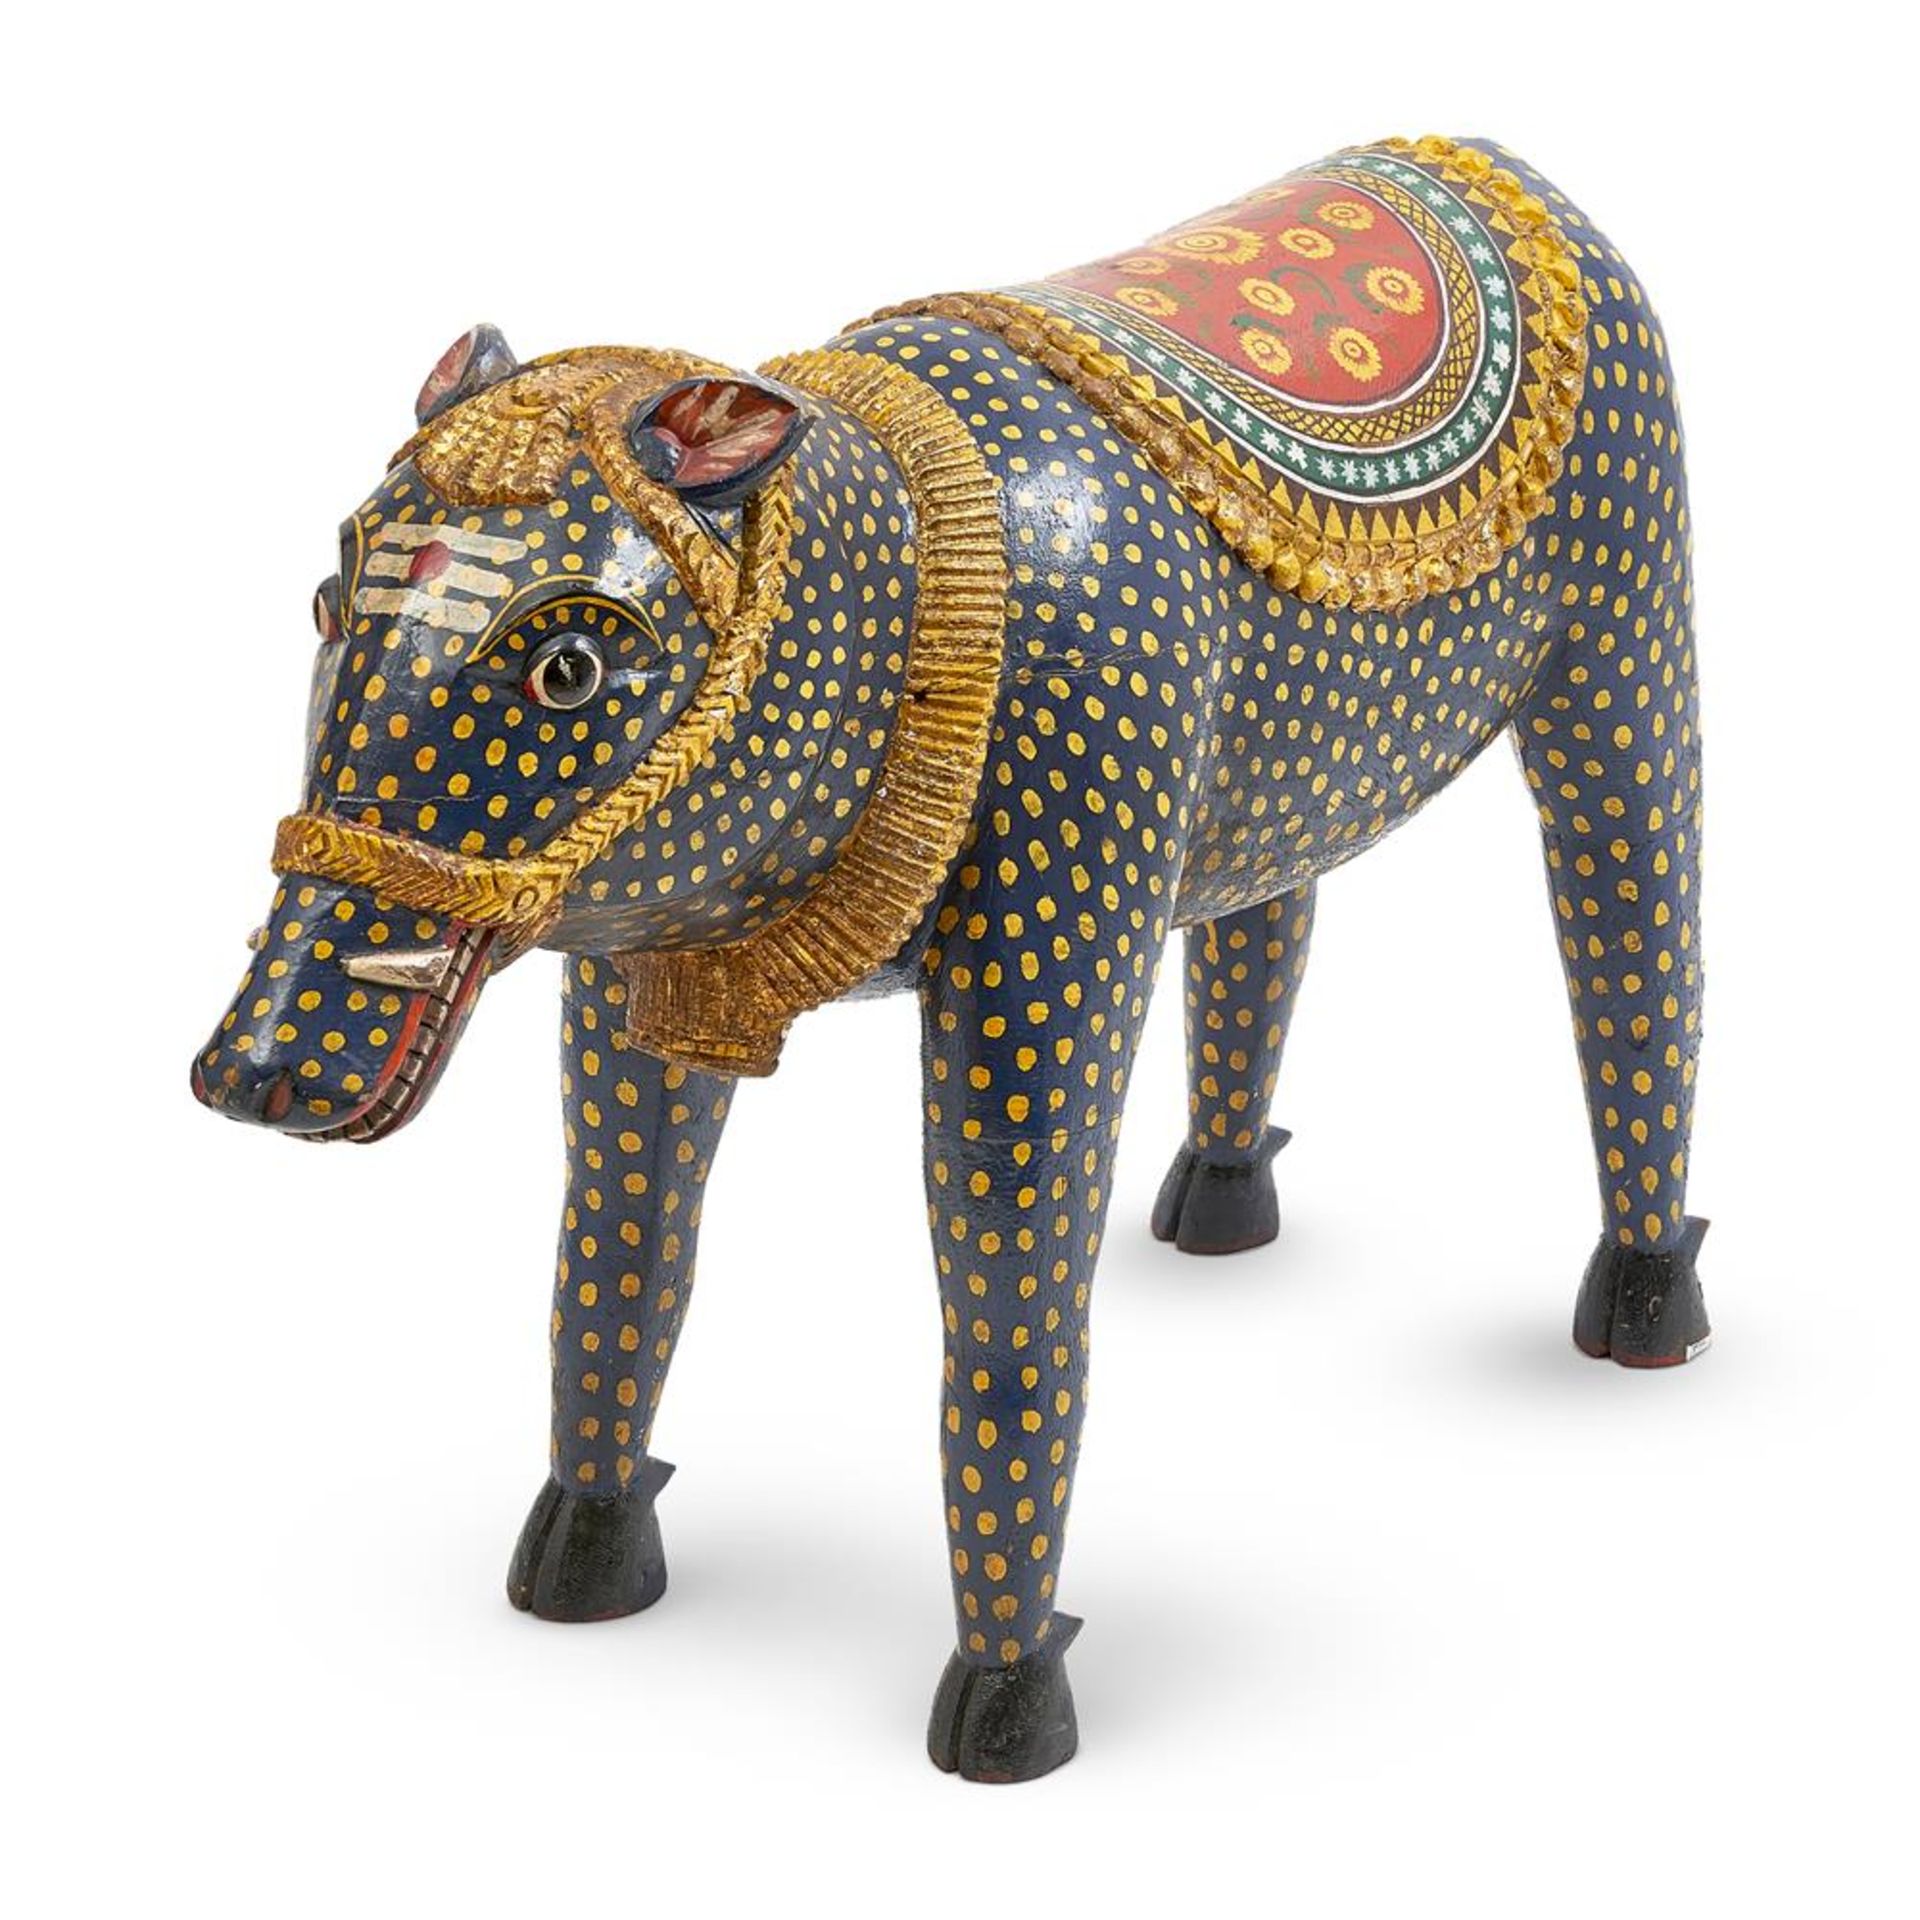 A LARGE INDIAN CARVED WOODEN CEREMONIAL PAINTED BOAR, 18TH/19TH CENTURY